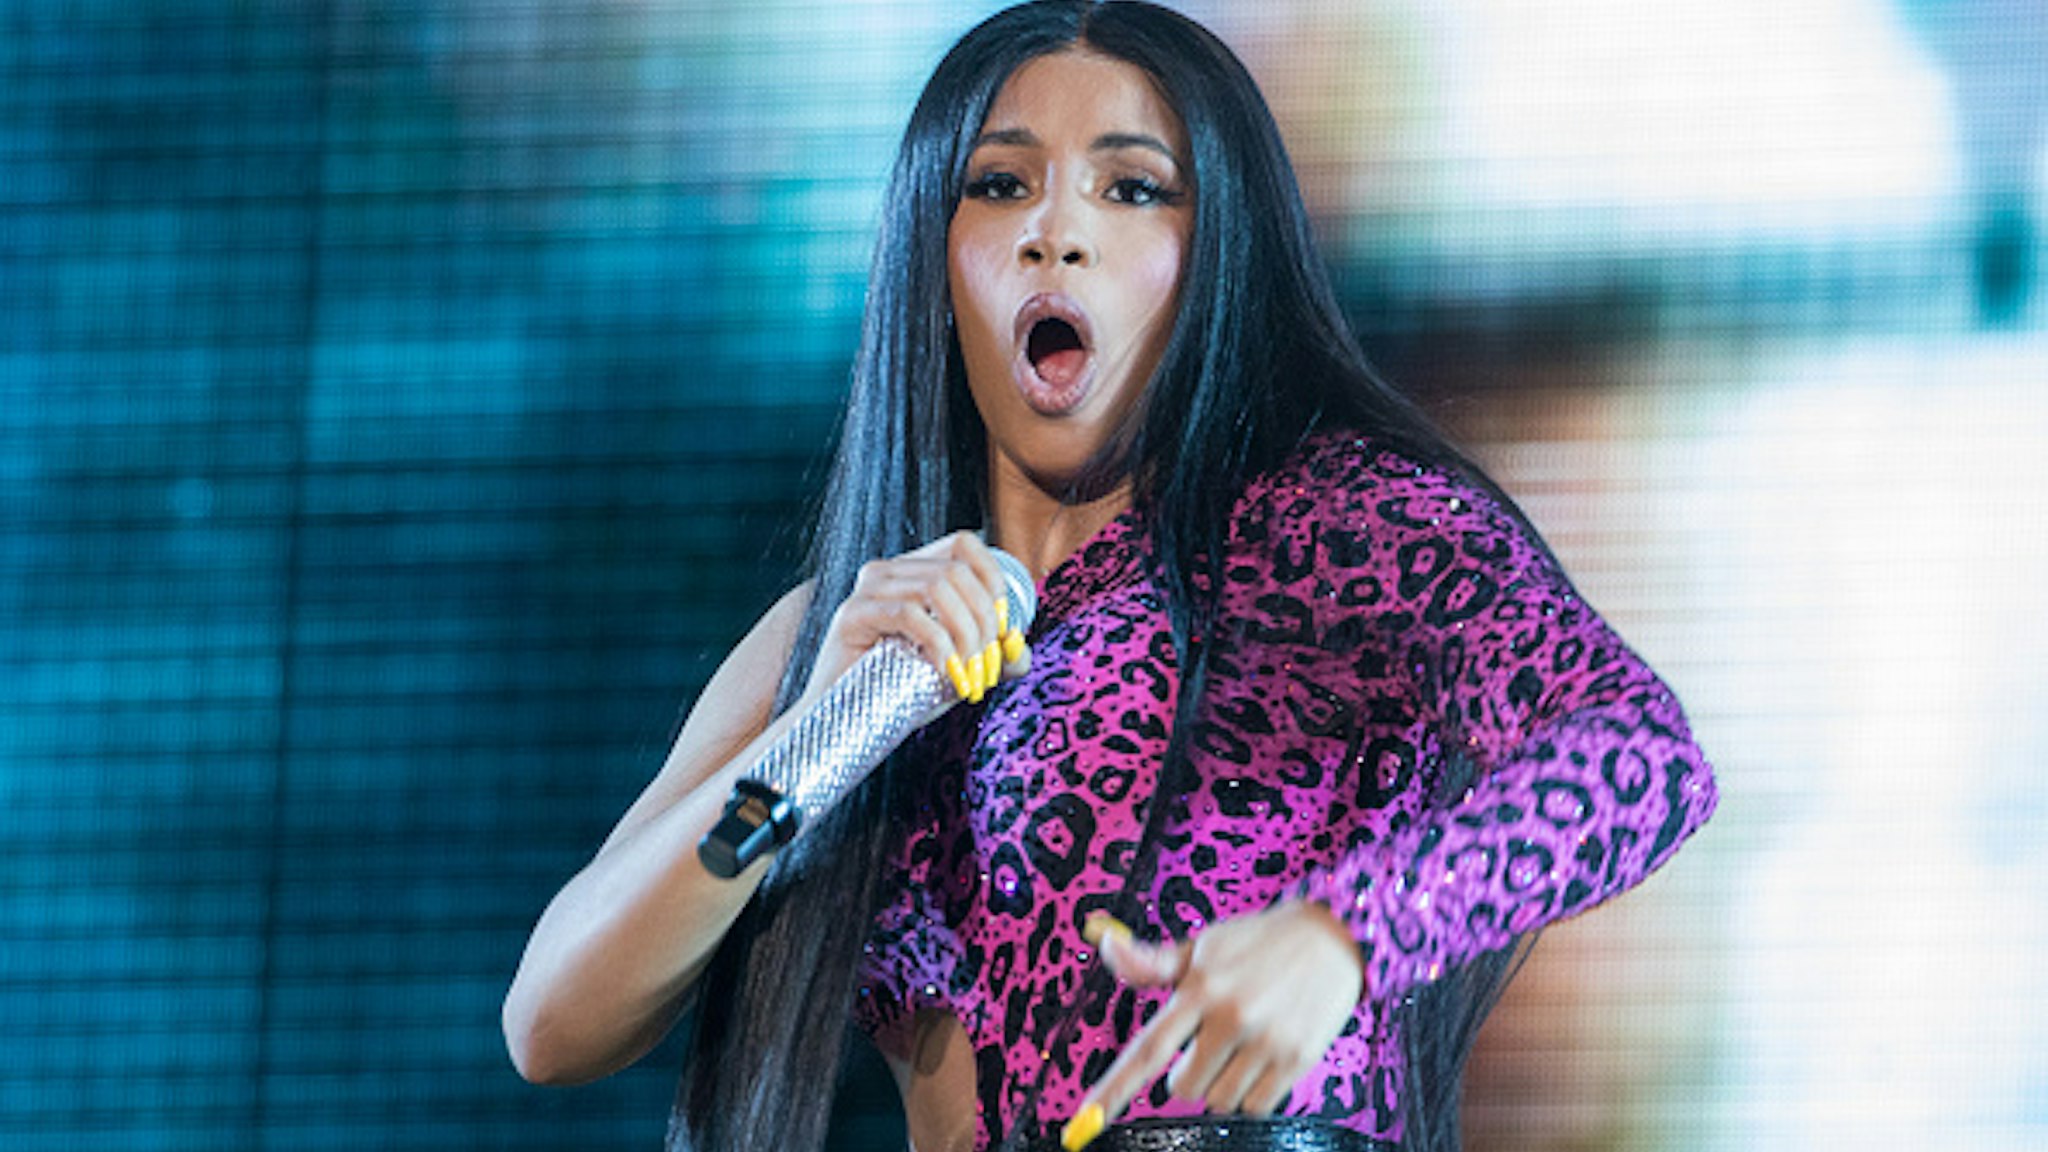 AUSTIN, TEXAS - OCTOBER 06: Rapper Cardi B performs onstage during weekend one, day three of Austin City Limits Music Festival at Zilker Park on October 04, 2019 in Austin, Texas.